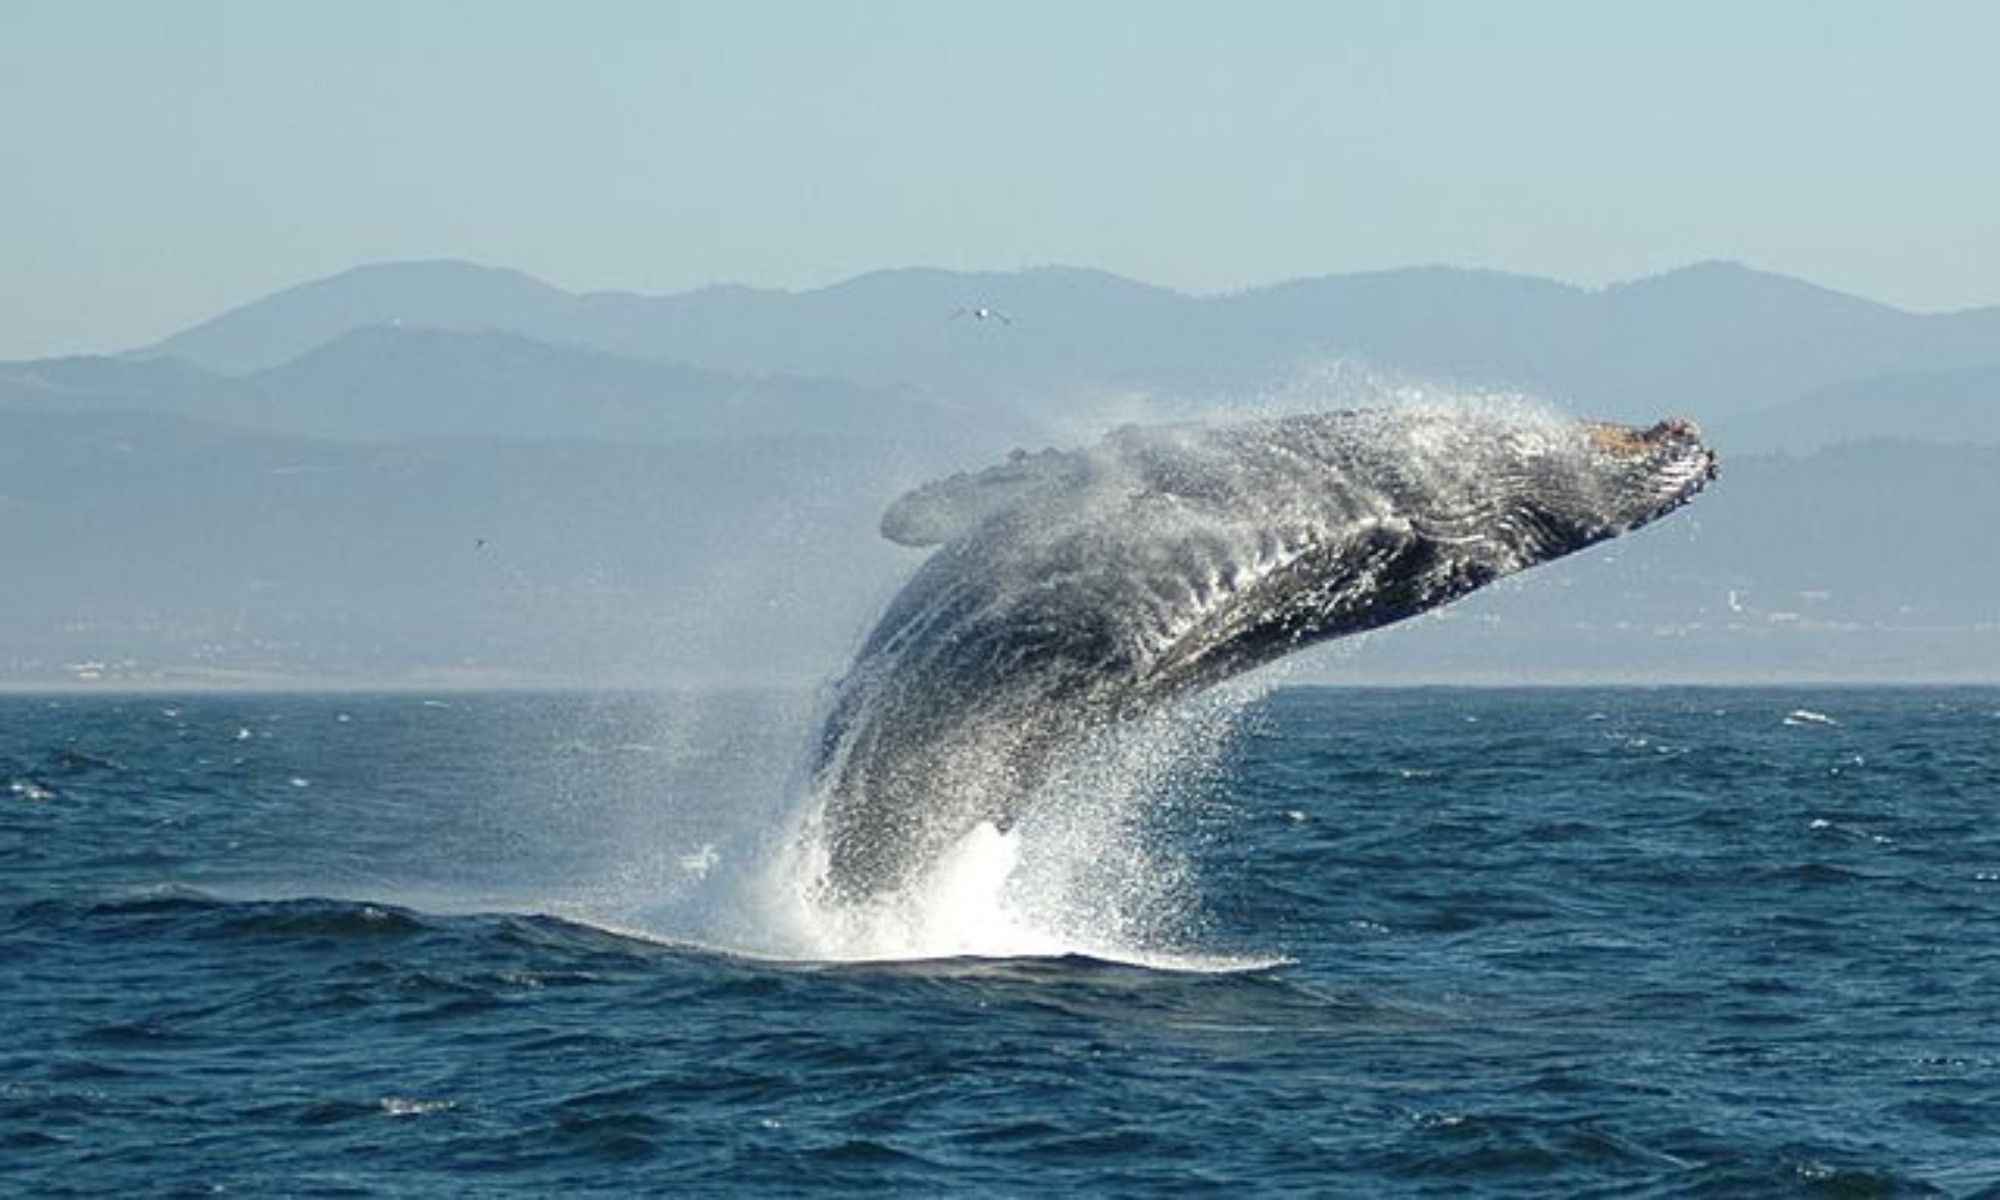 How Do Whales Protect Themselves?